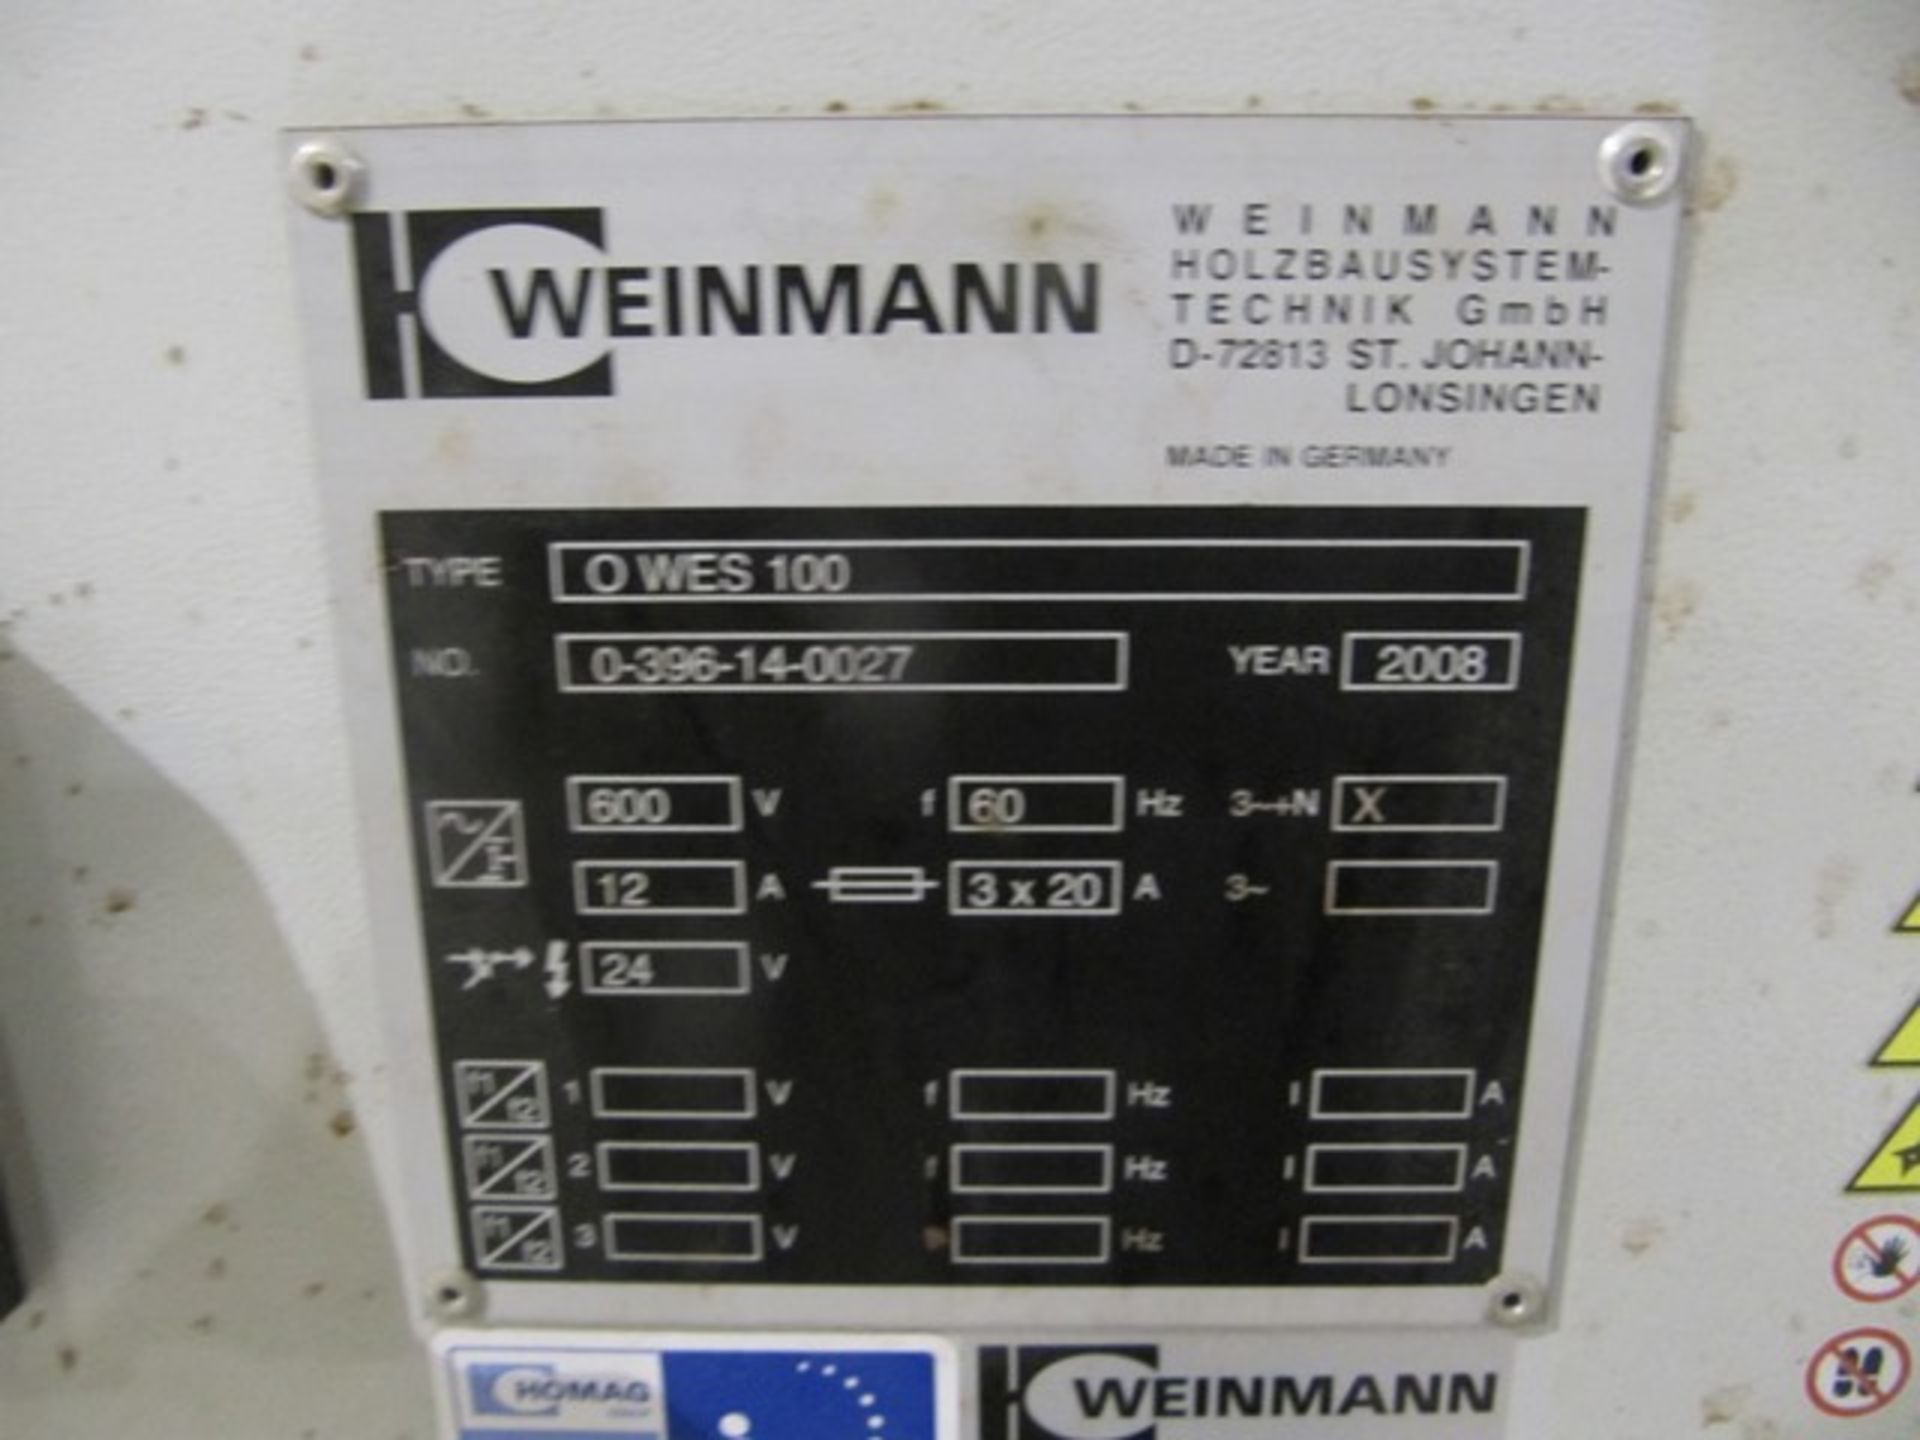 2008 WEINMANN Component Nailer Optimat Production Line, Model O WES 100, sn 0-396-14-0027 - Image 4 of 4